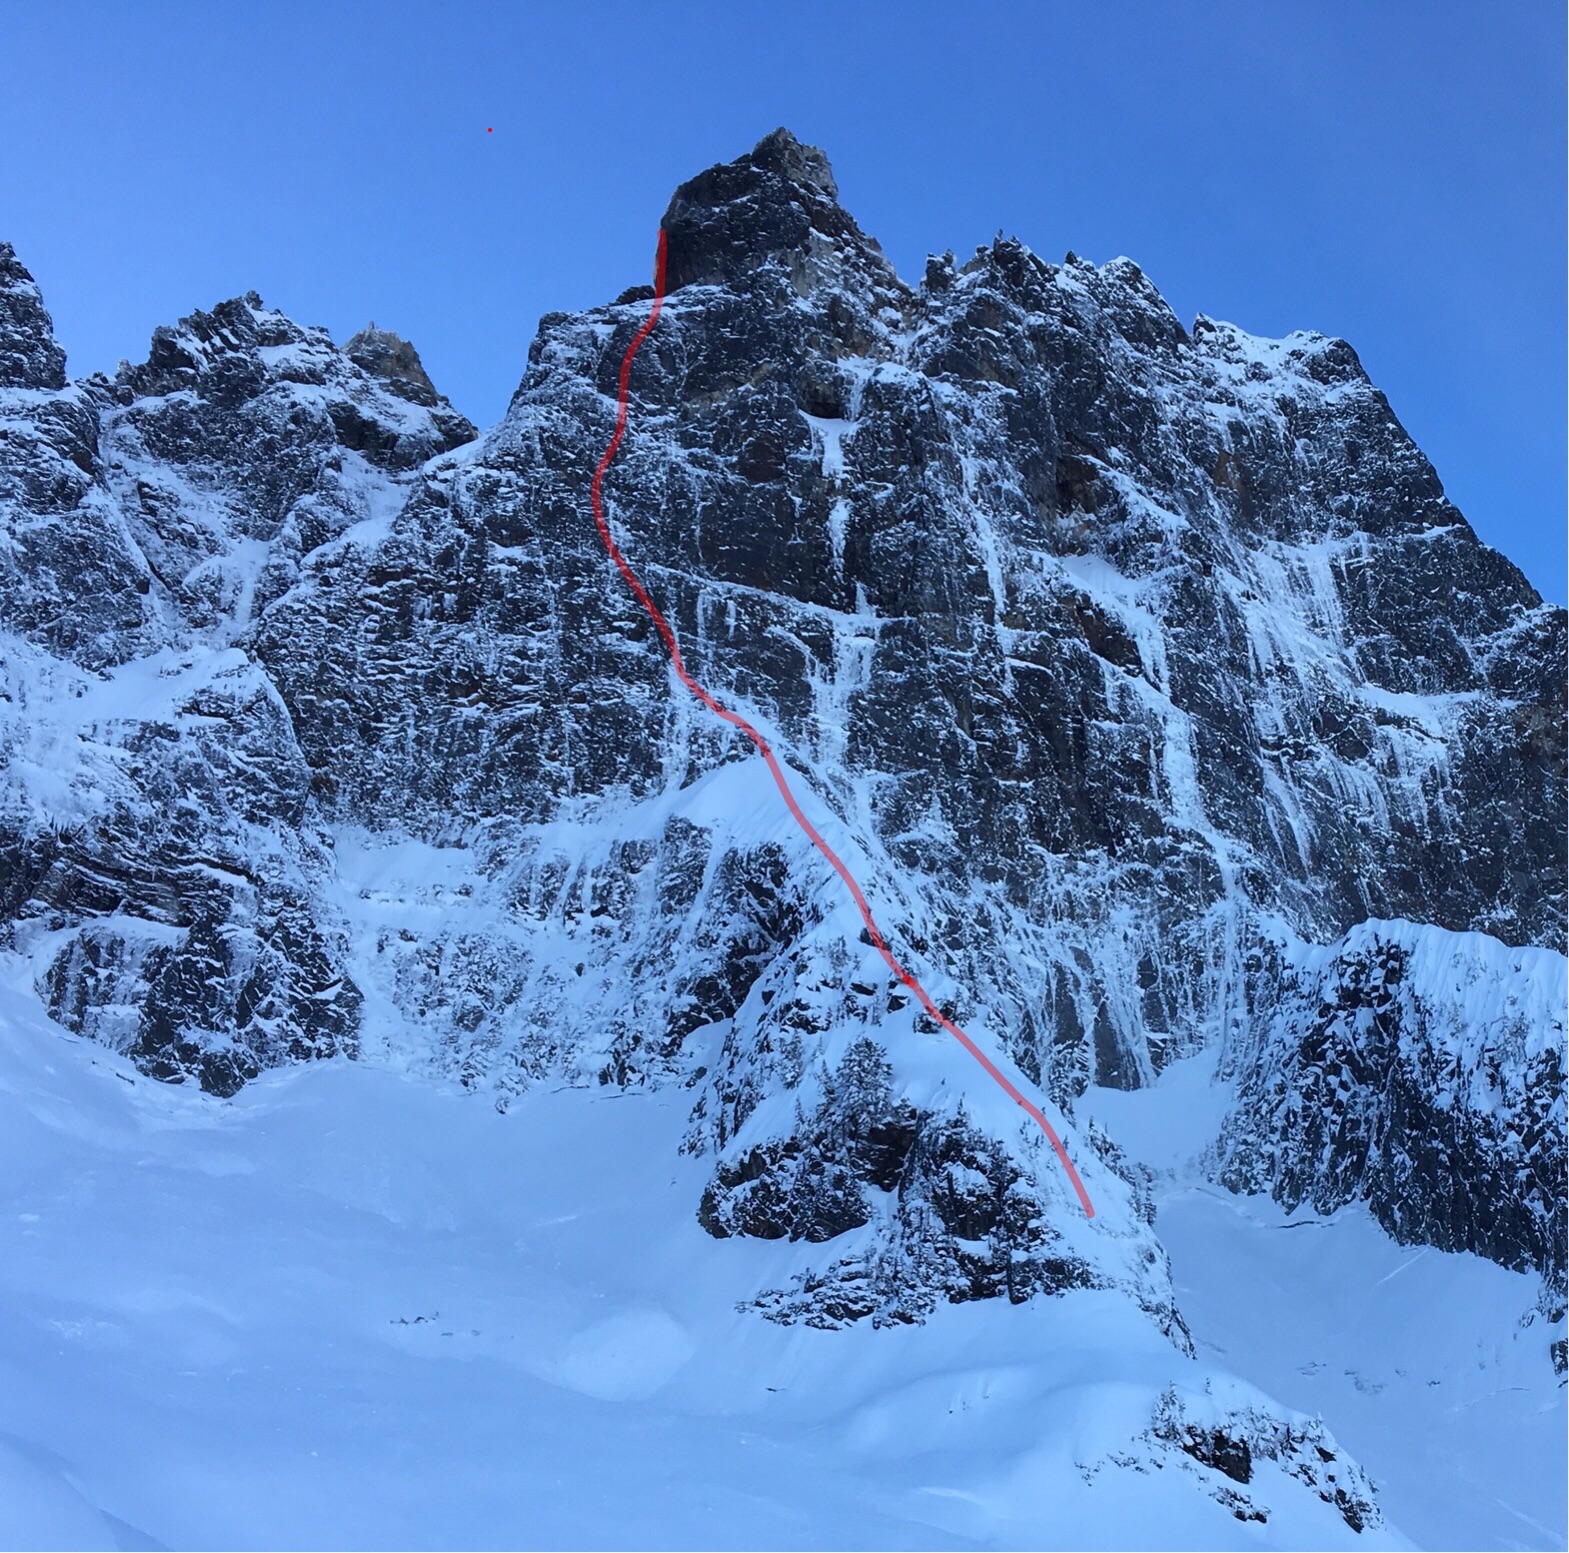 The red line shows the route taken by Marc-Andre Leclerc and Tom Livingstone on January 3 for the first winter ascent of the Navigator Wall on Canada's Mt. Slesse. They estimated the difficulties to be M7+ R or Scottish VIII or IV, according to Livingstone. [Photo] Marc-Andre Leclerc